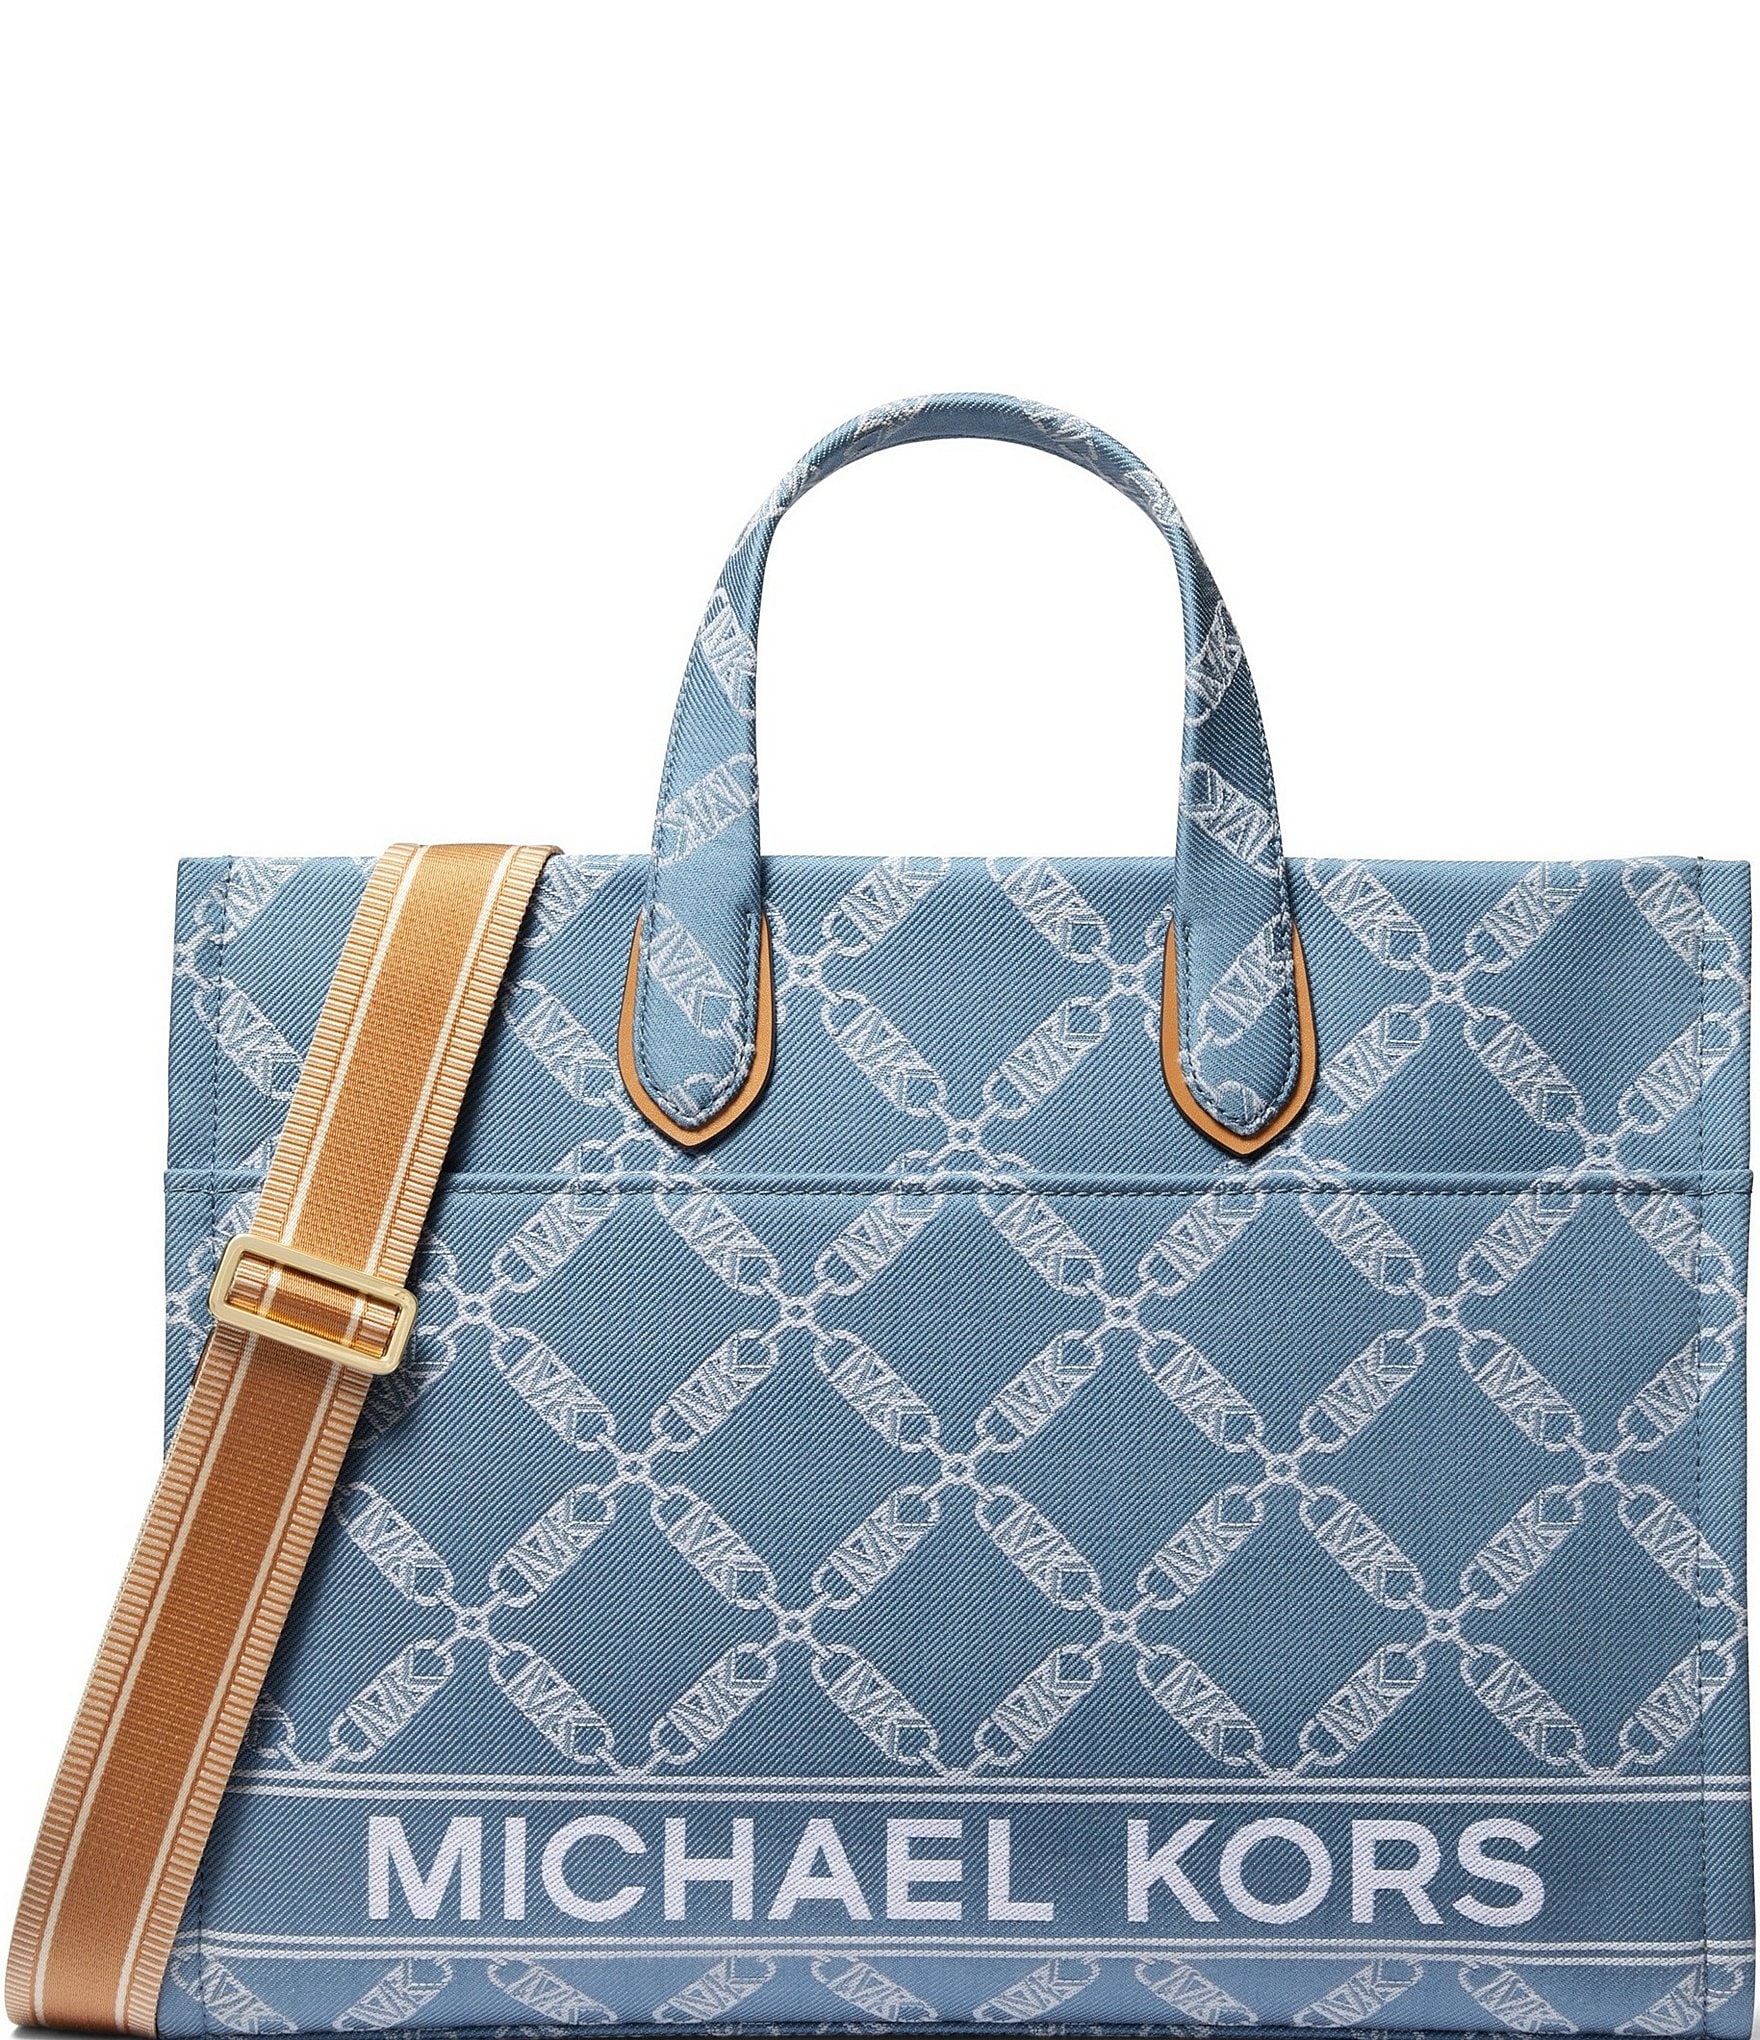 Michael Kors Handbags What We Need To Know - My Small Store